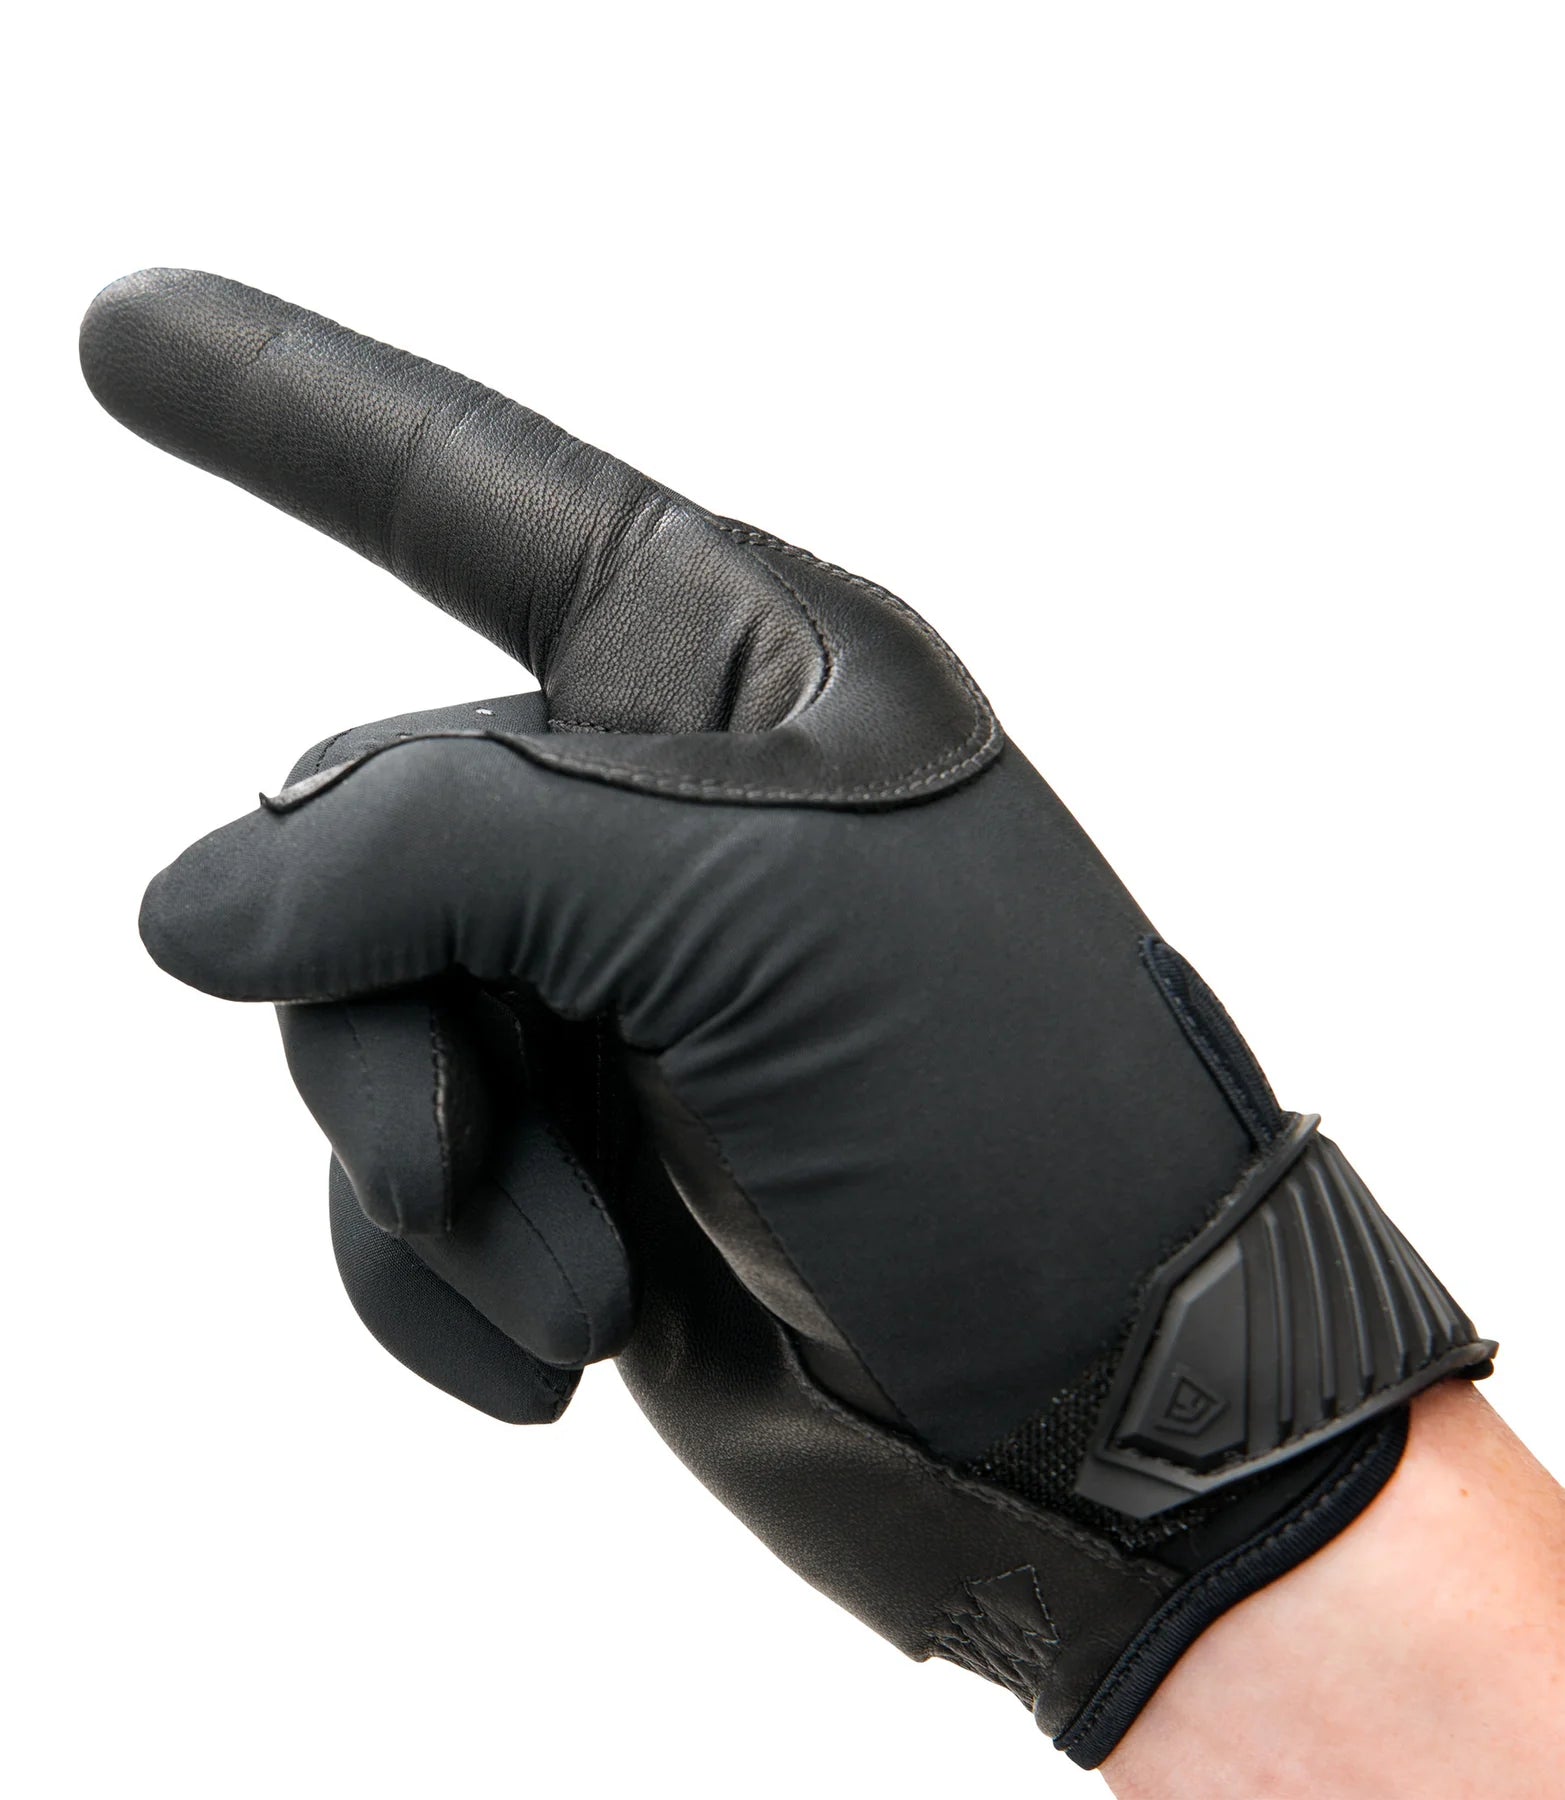 First Tactical Men's Lightweight Patrol Gloves 150001 - Clothing & Accessories